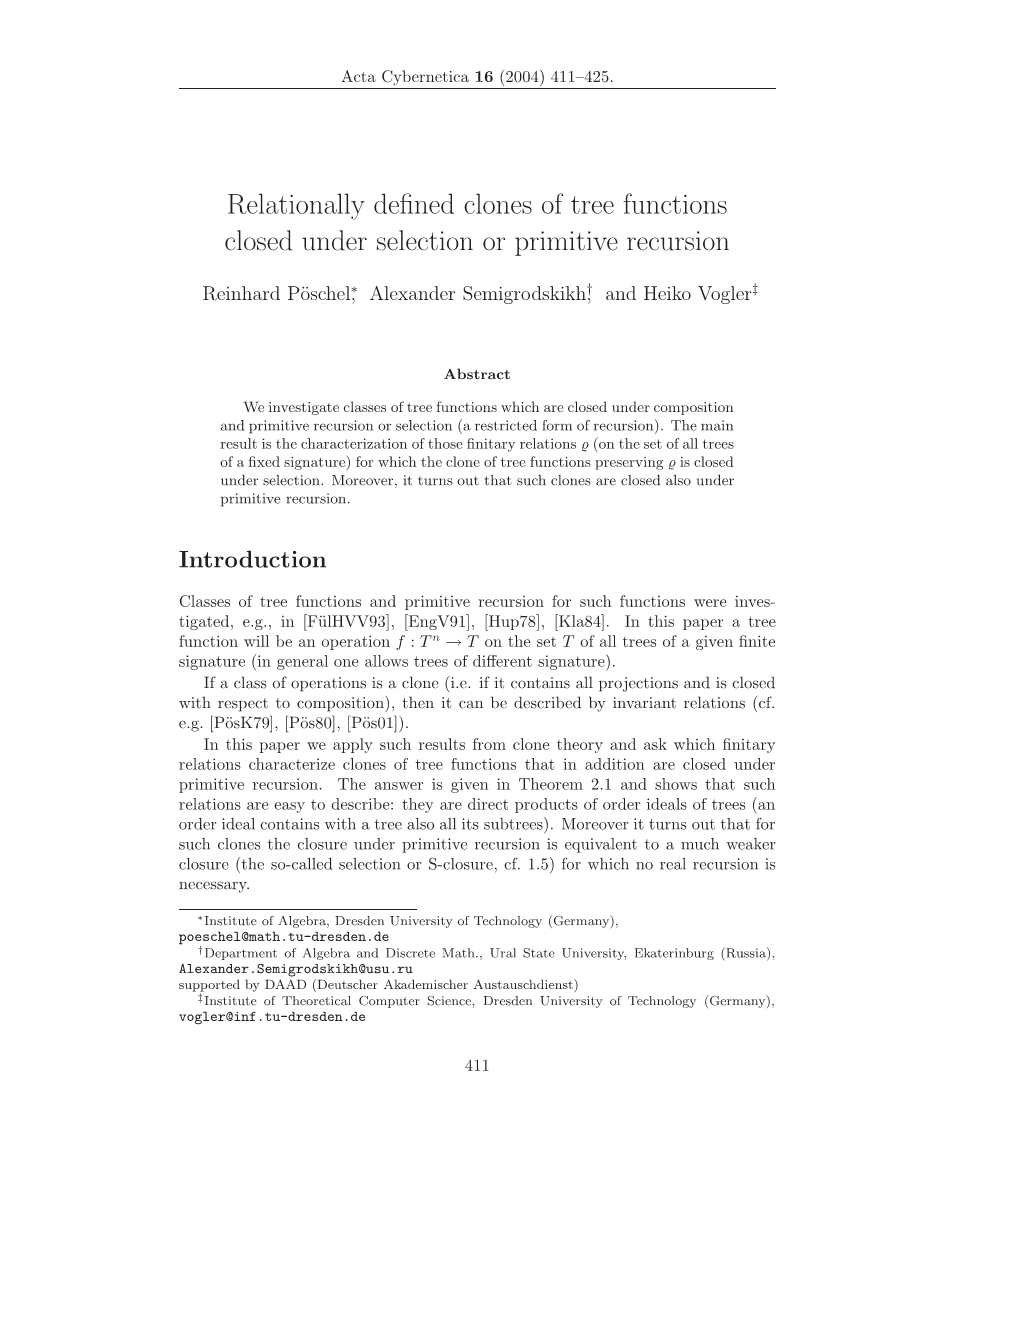 Relationally Defined Clones of Tree Functions Closed Under Selection Or